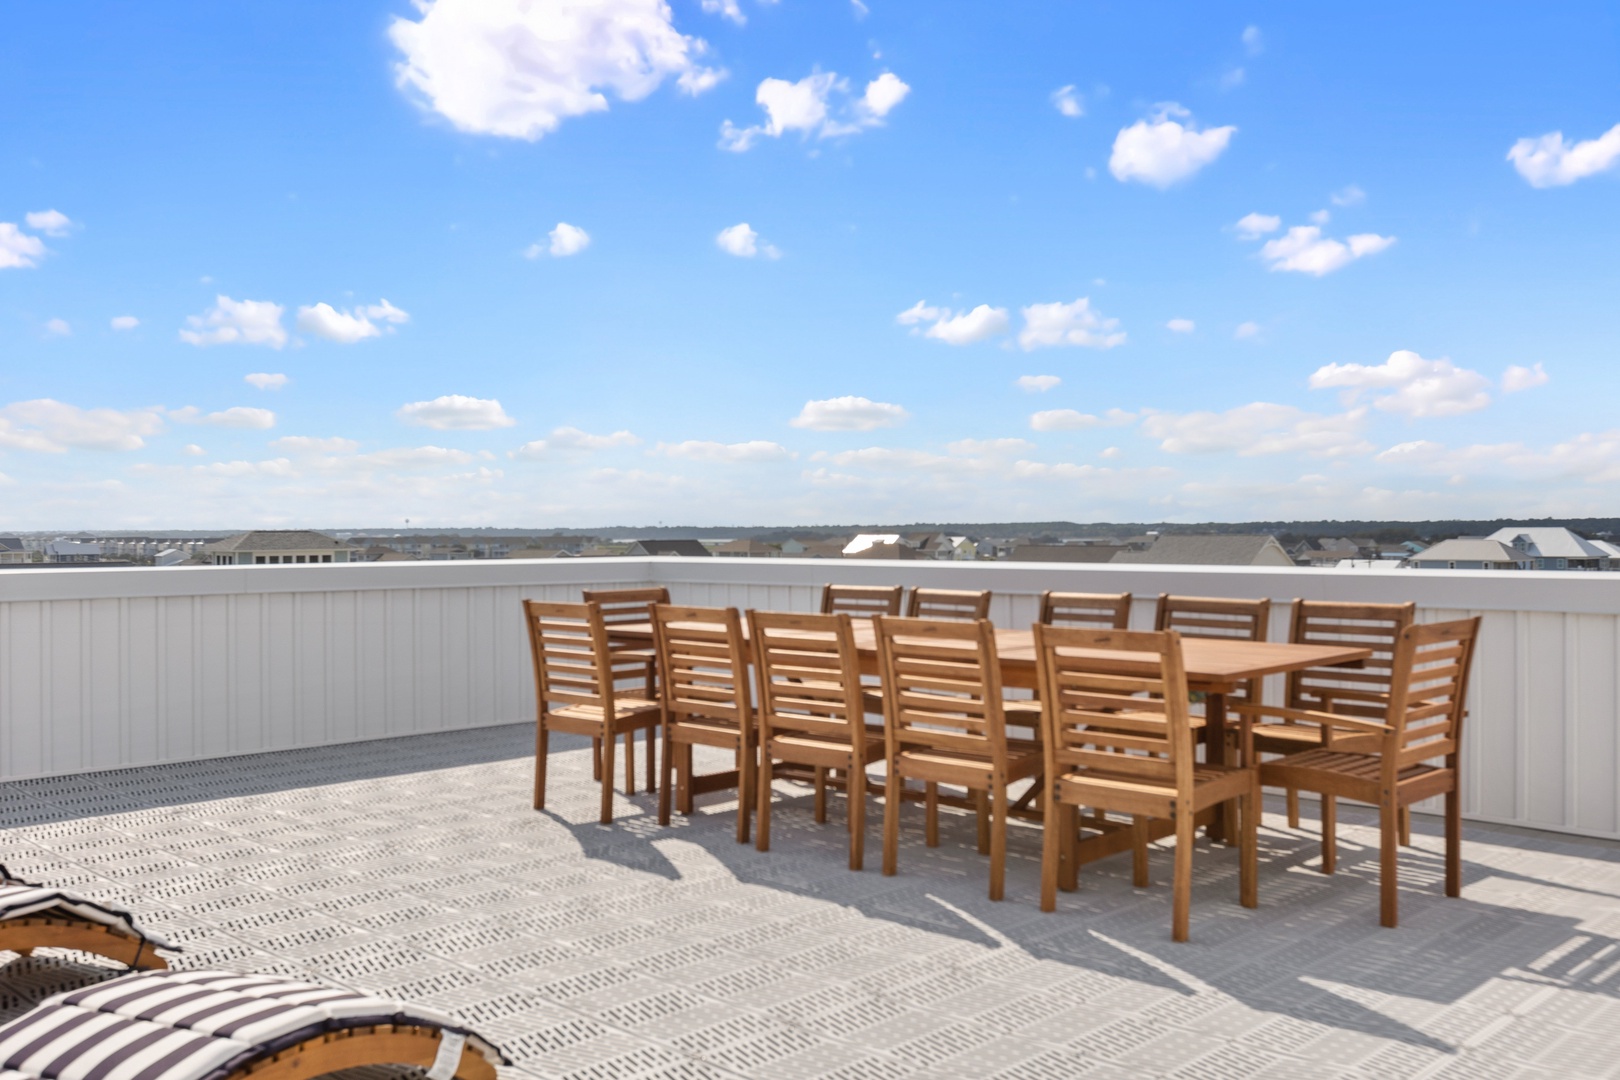 The top level sun deck with dining for 10